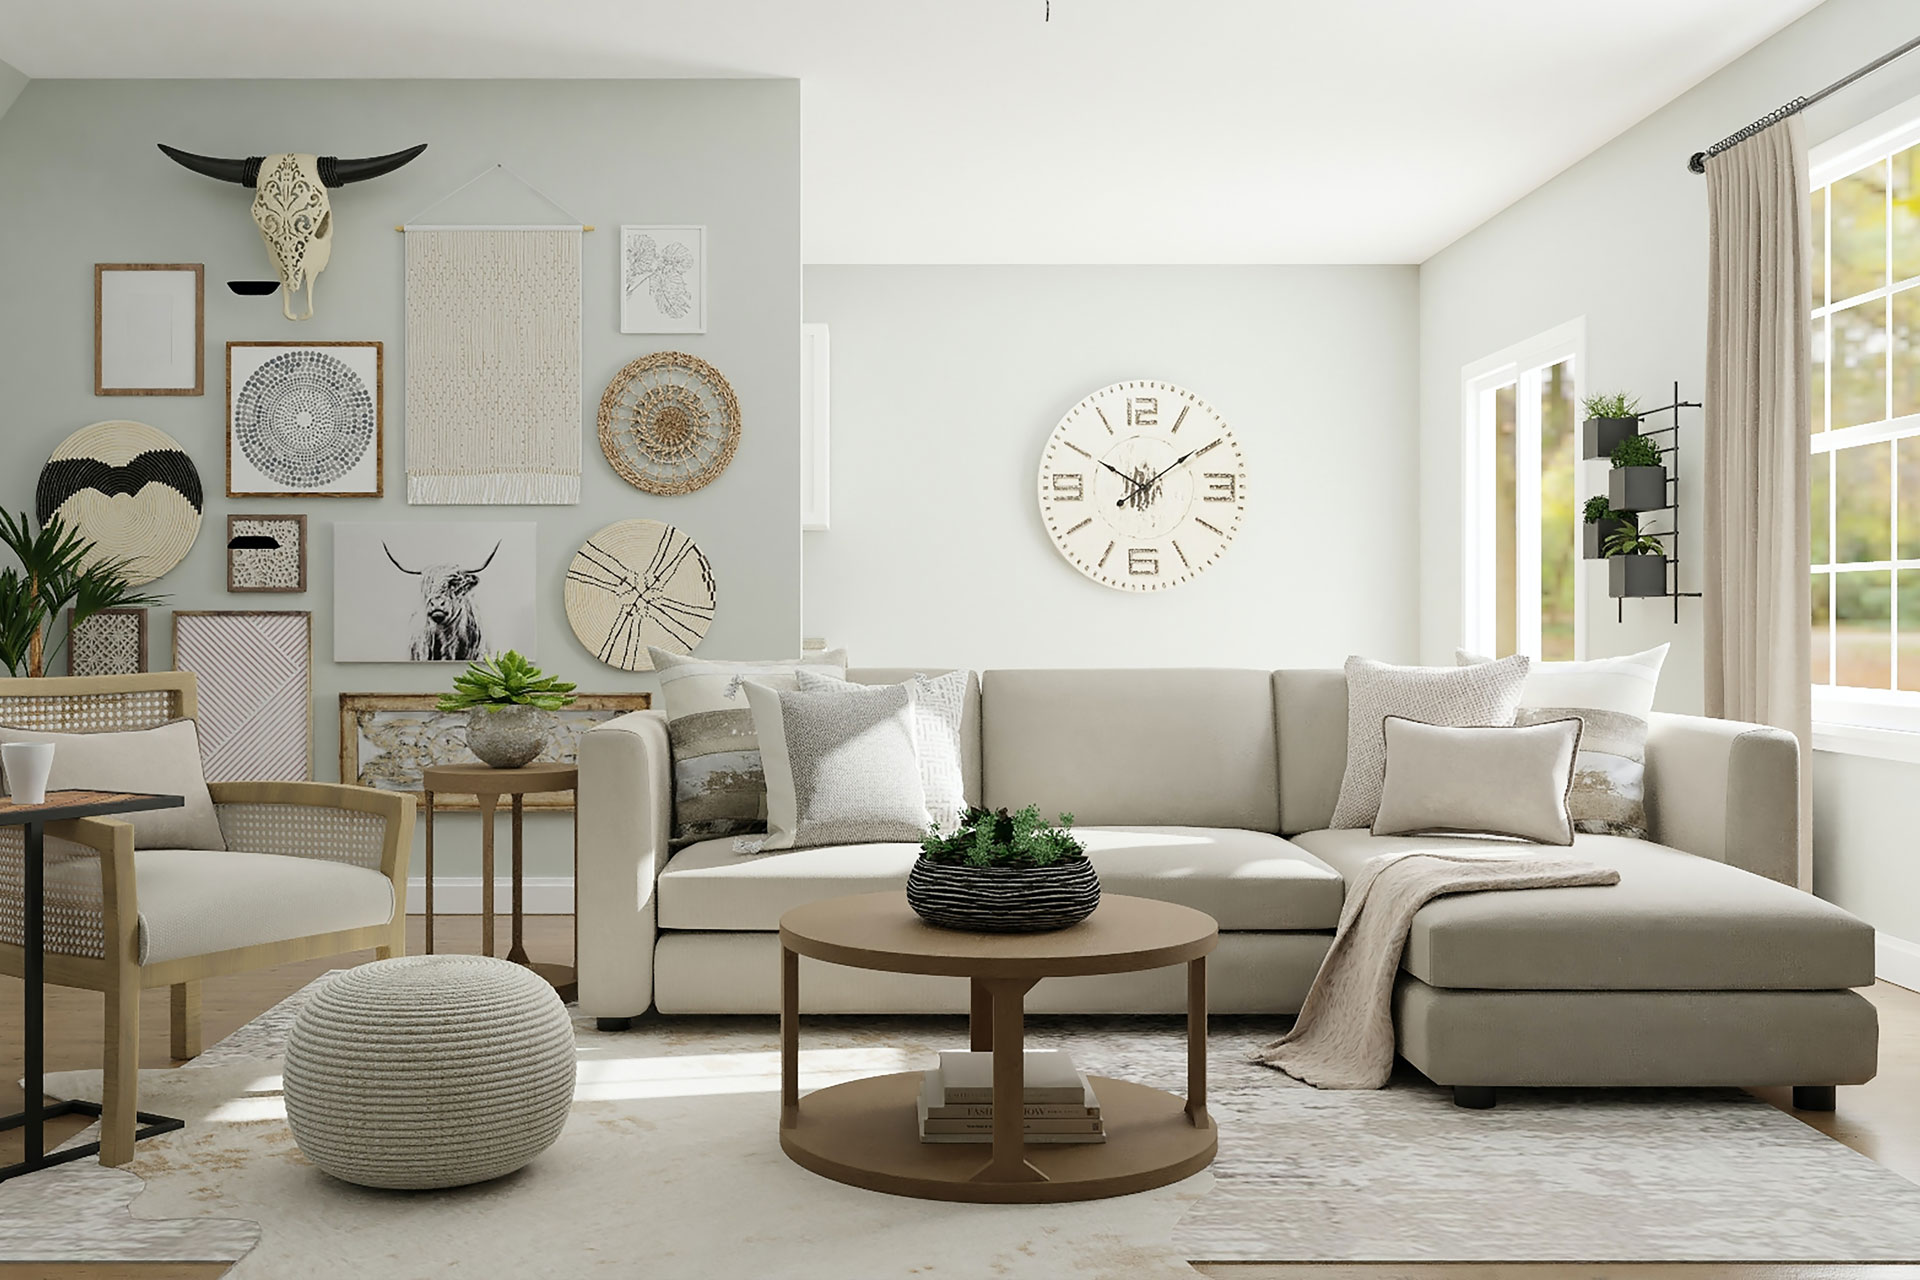 Living room area with white decor and fittings